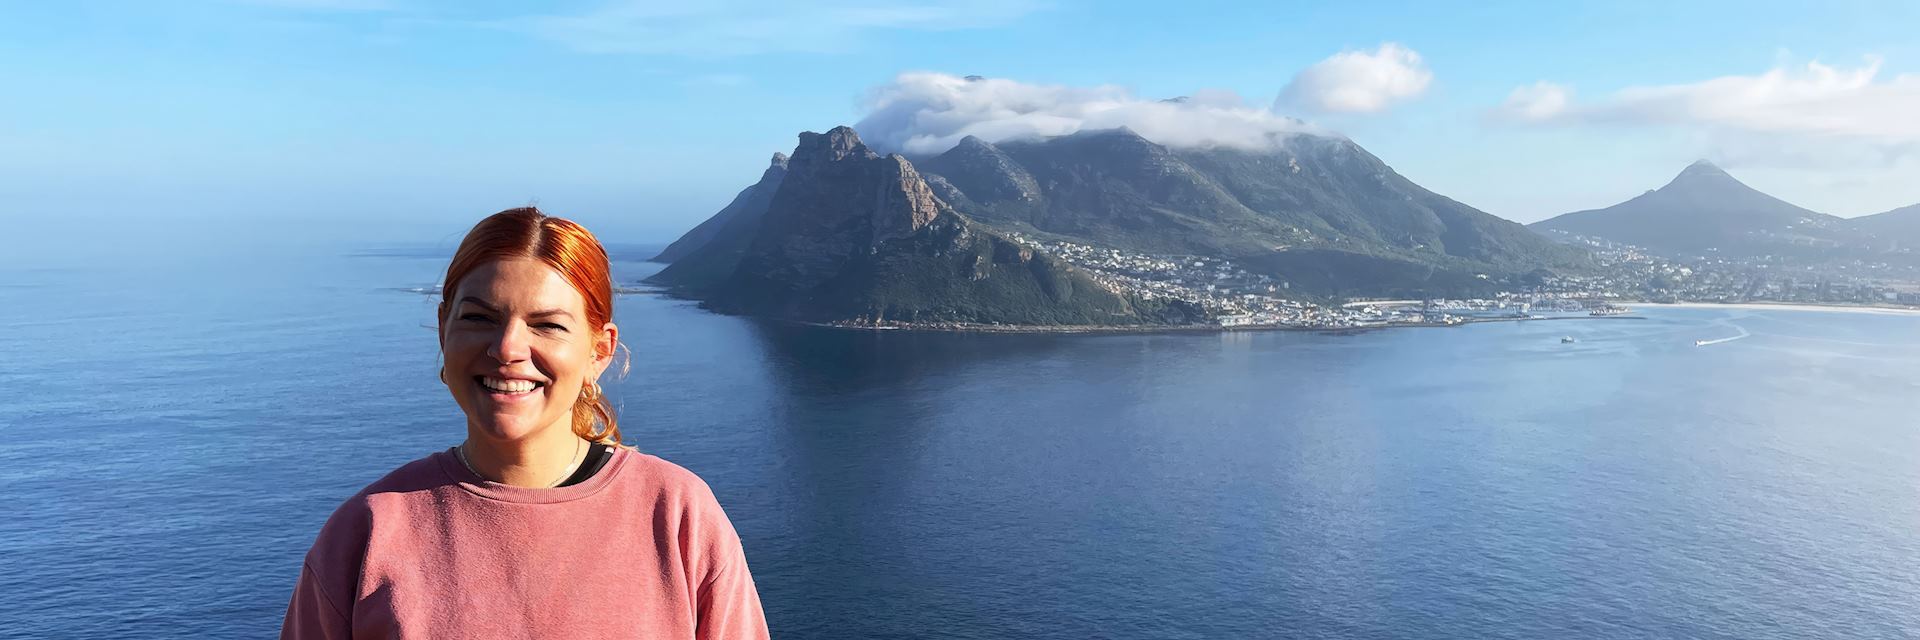 Louise at the Cape Peninsula, South Africa